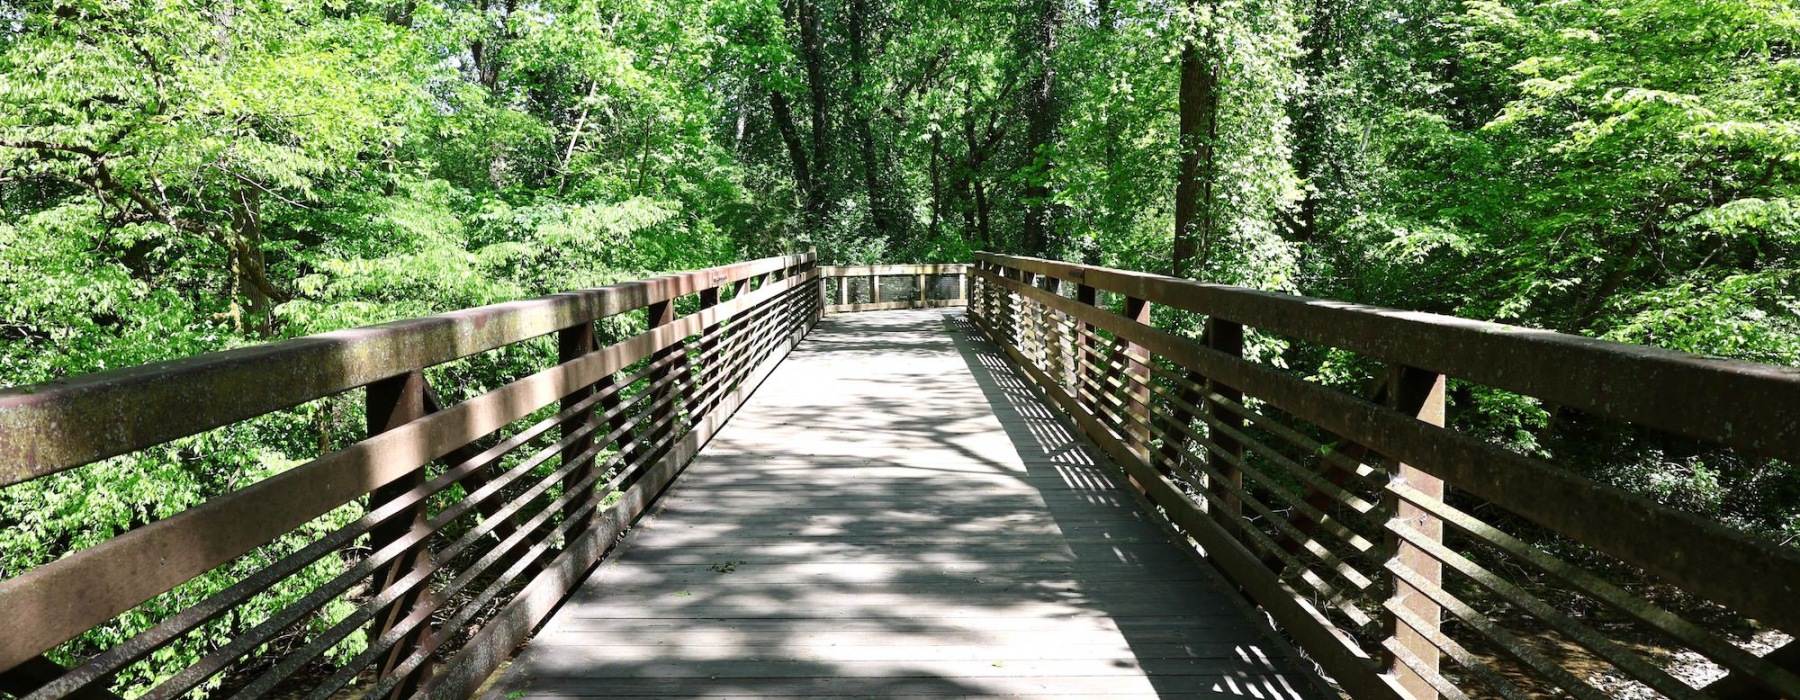 a bridge in the woods surrounded by trees